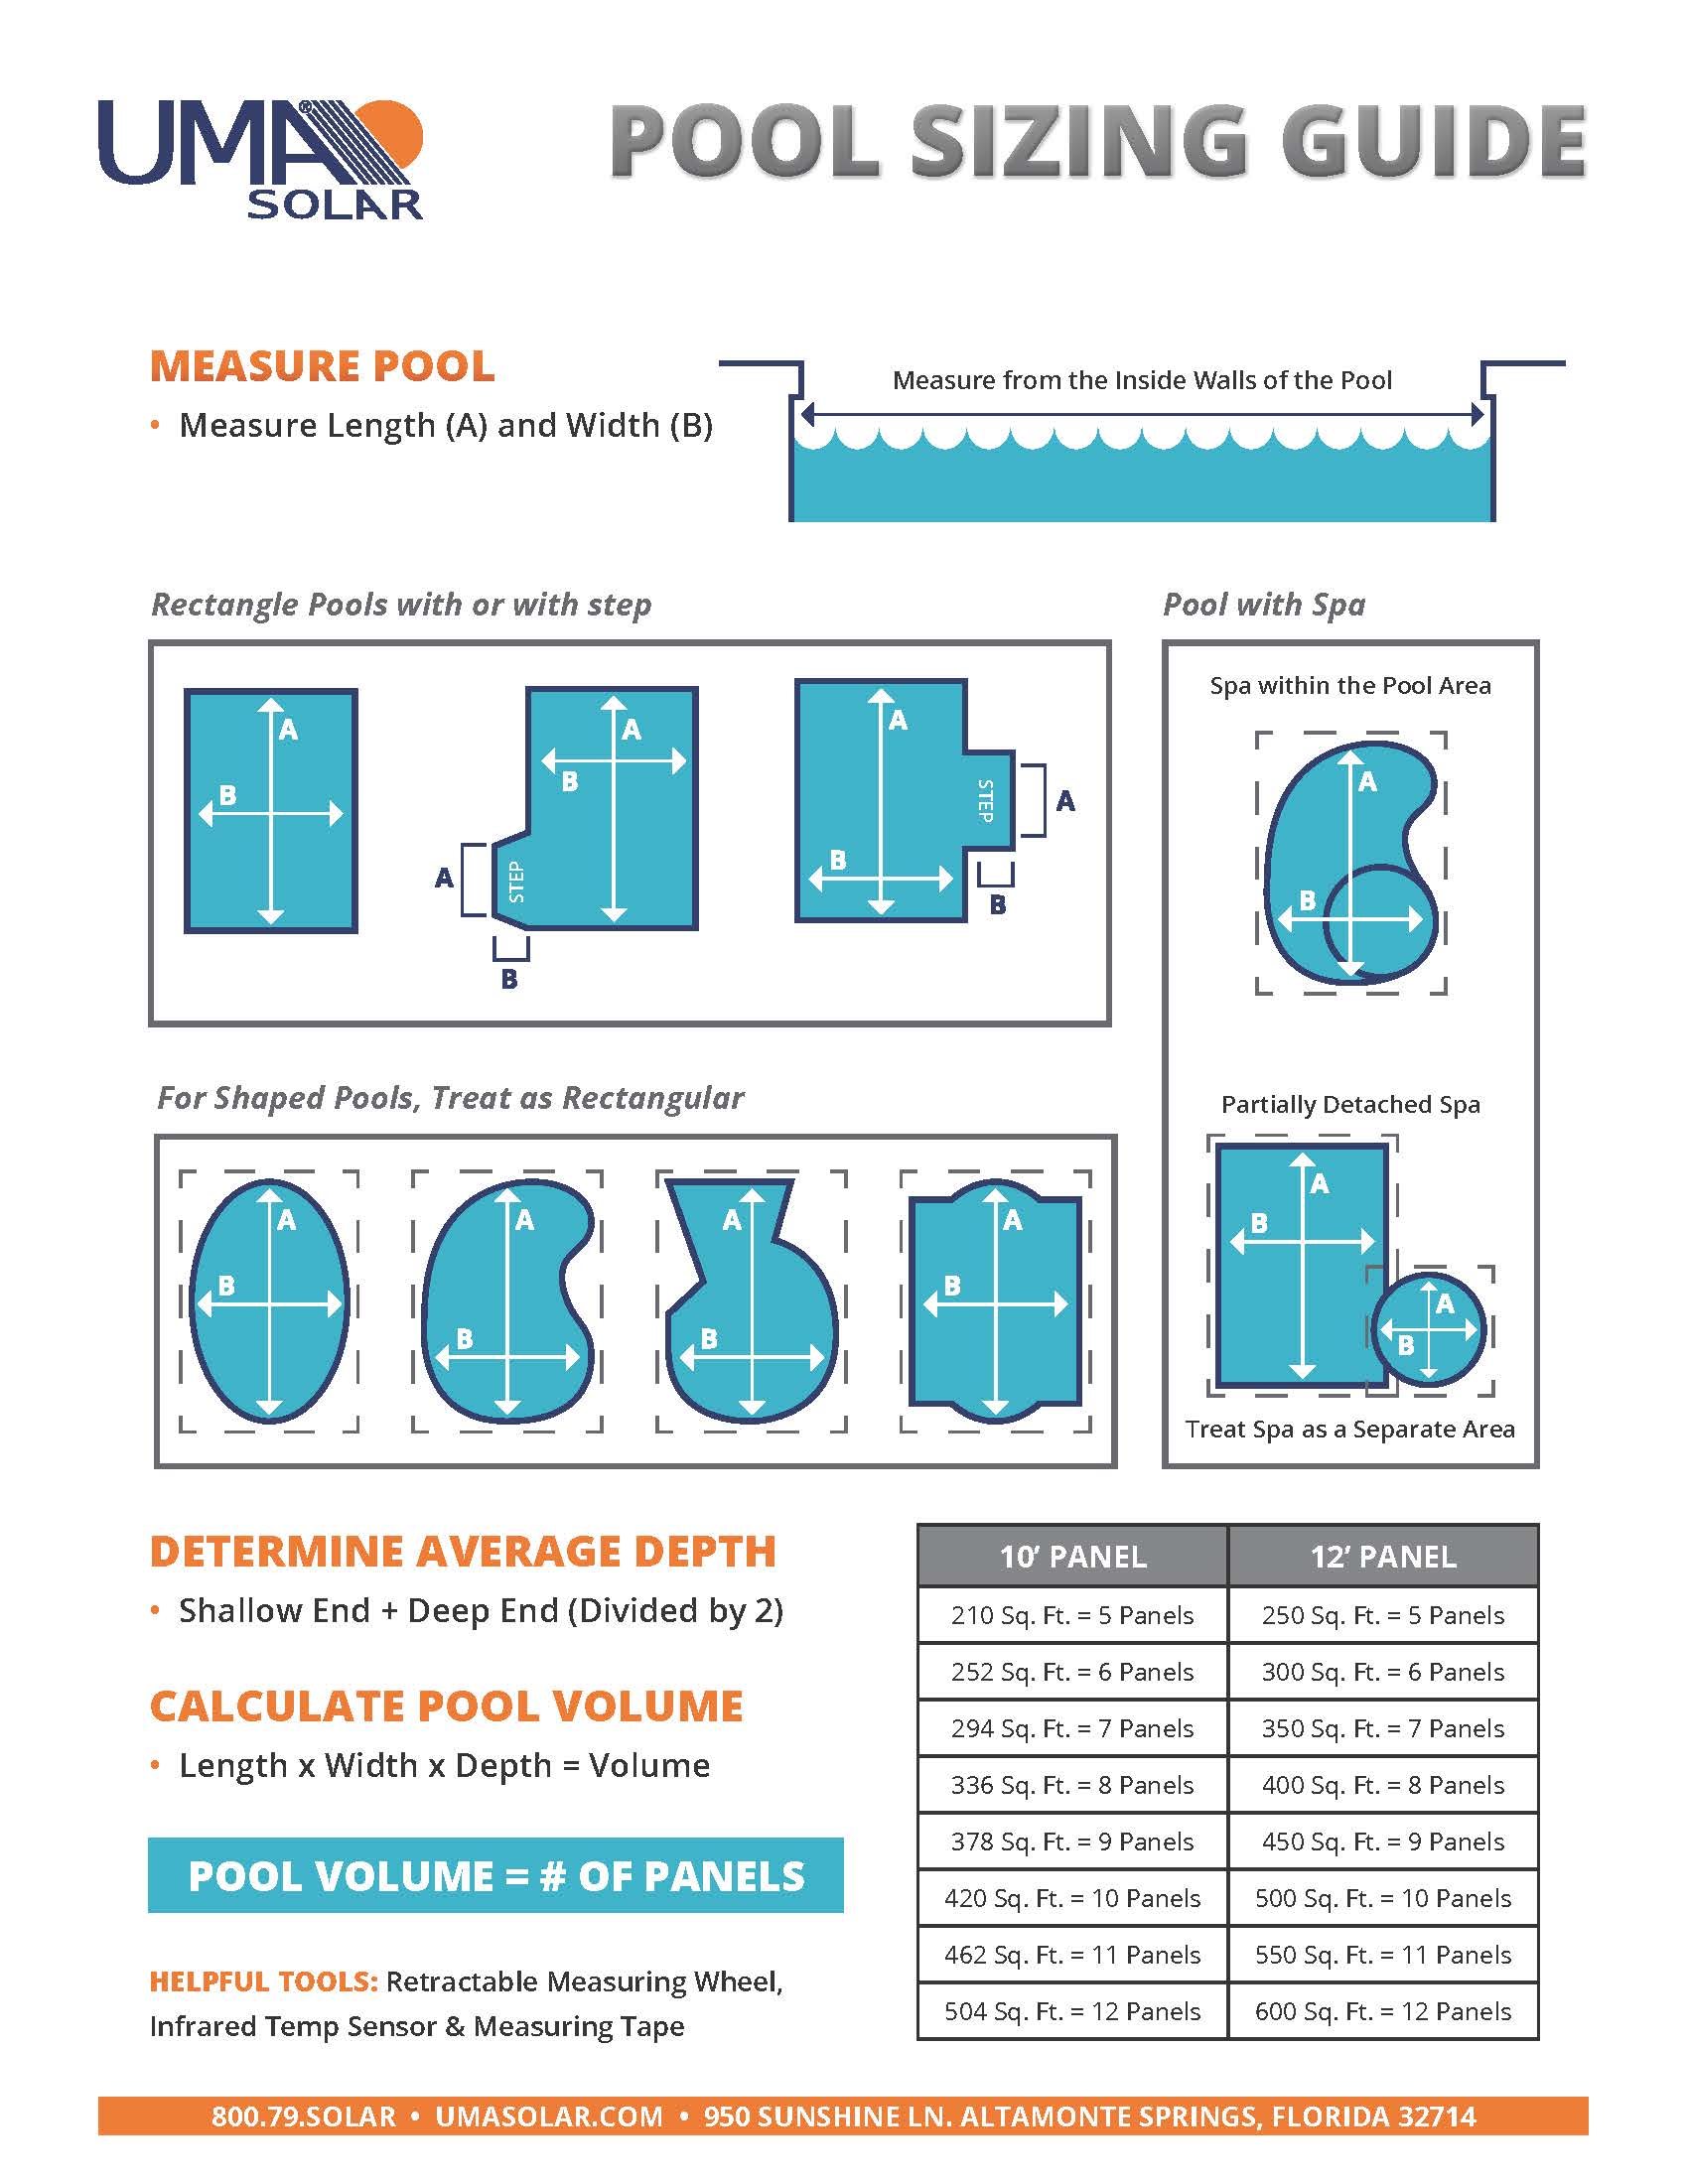 Pool sizing guide for solar panels